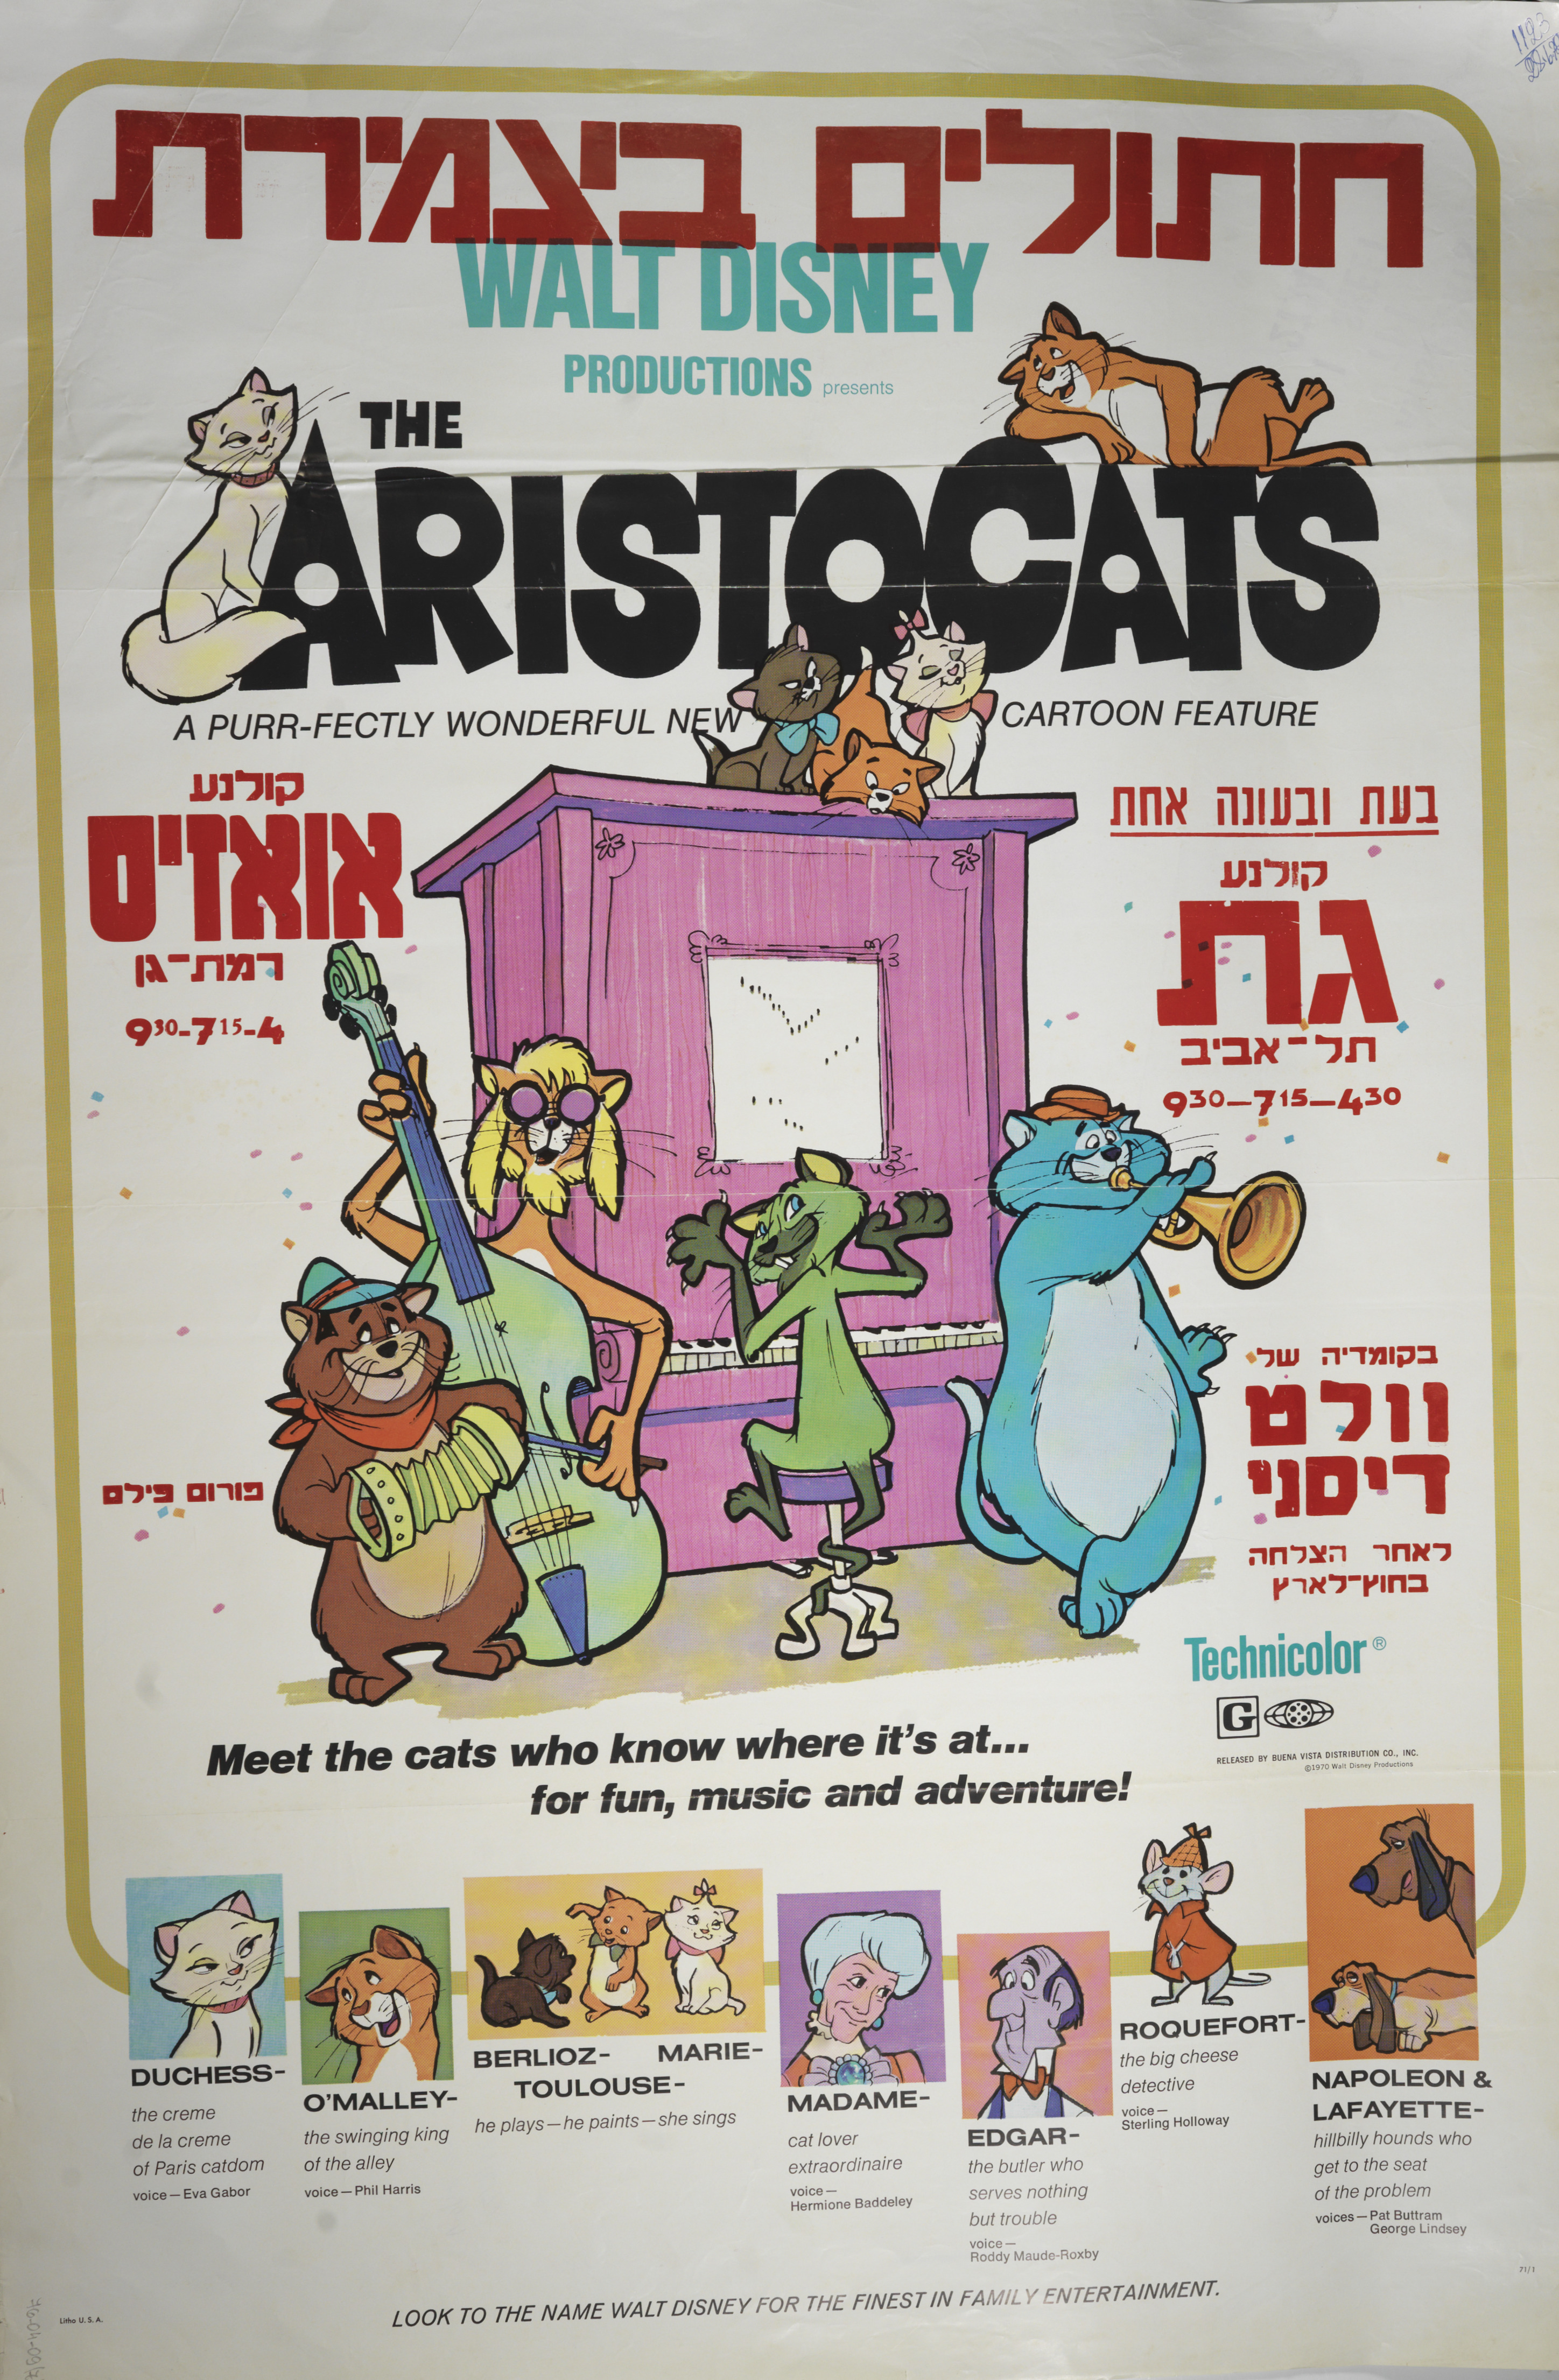 Image of Israeli poster for the film, The Aristocats